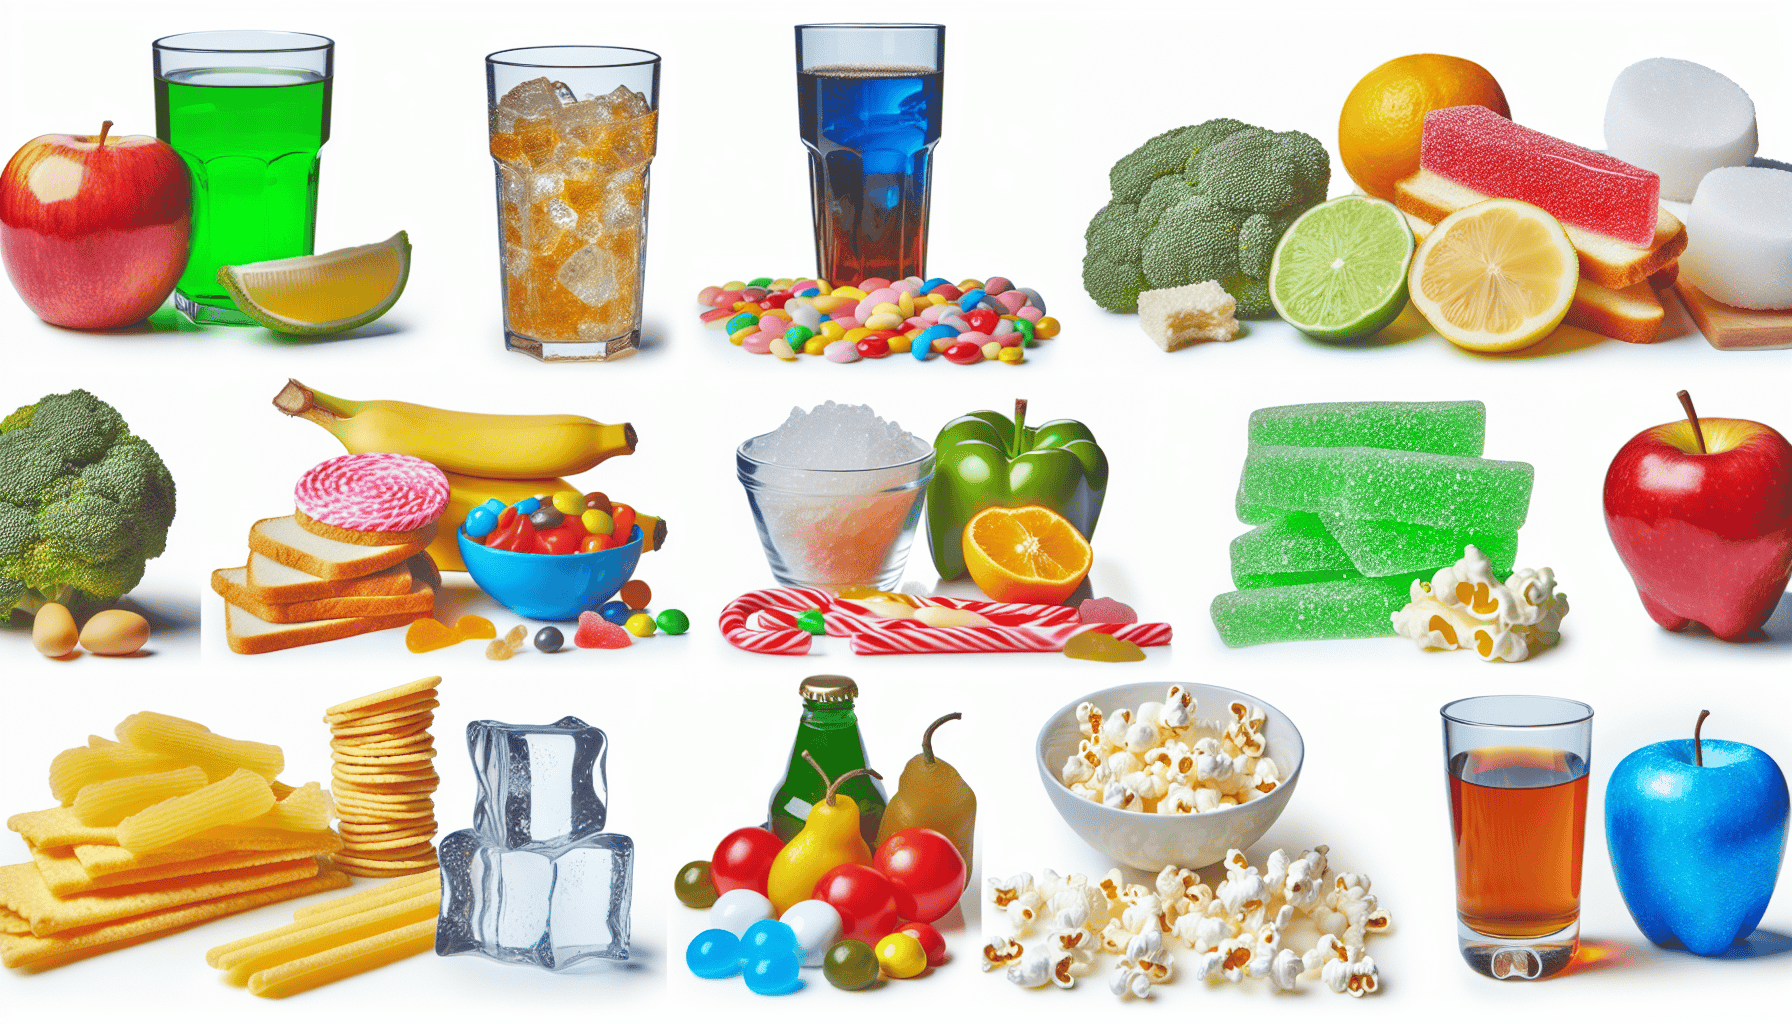 Foods-and-Beverages-to-Avoid-Preventing-Cavities-and-Dental-Iss